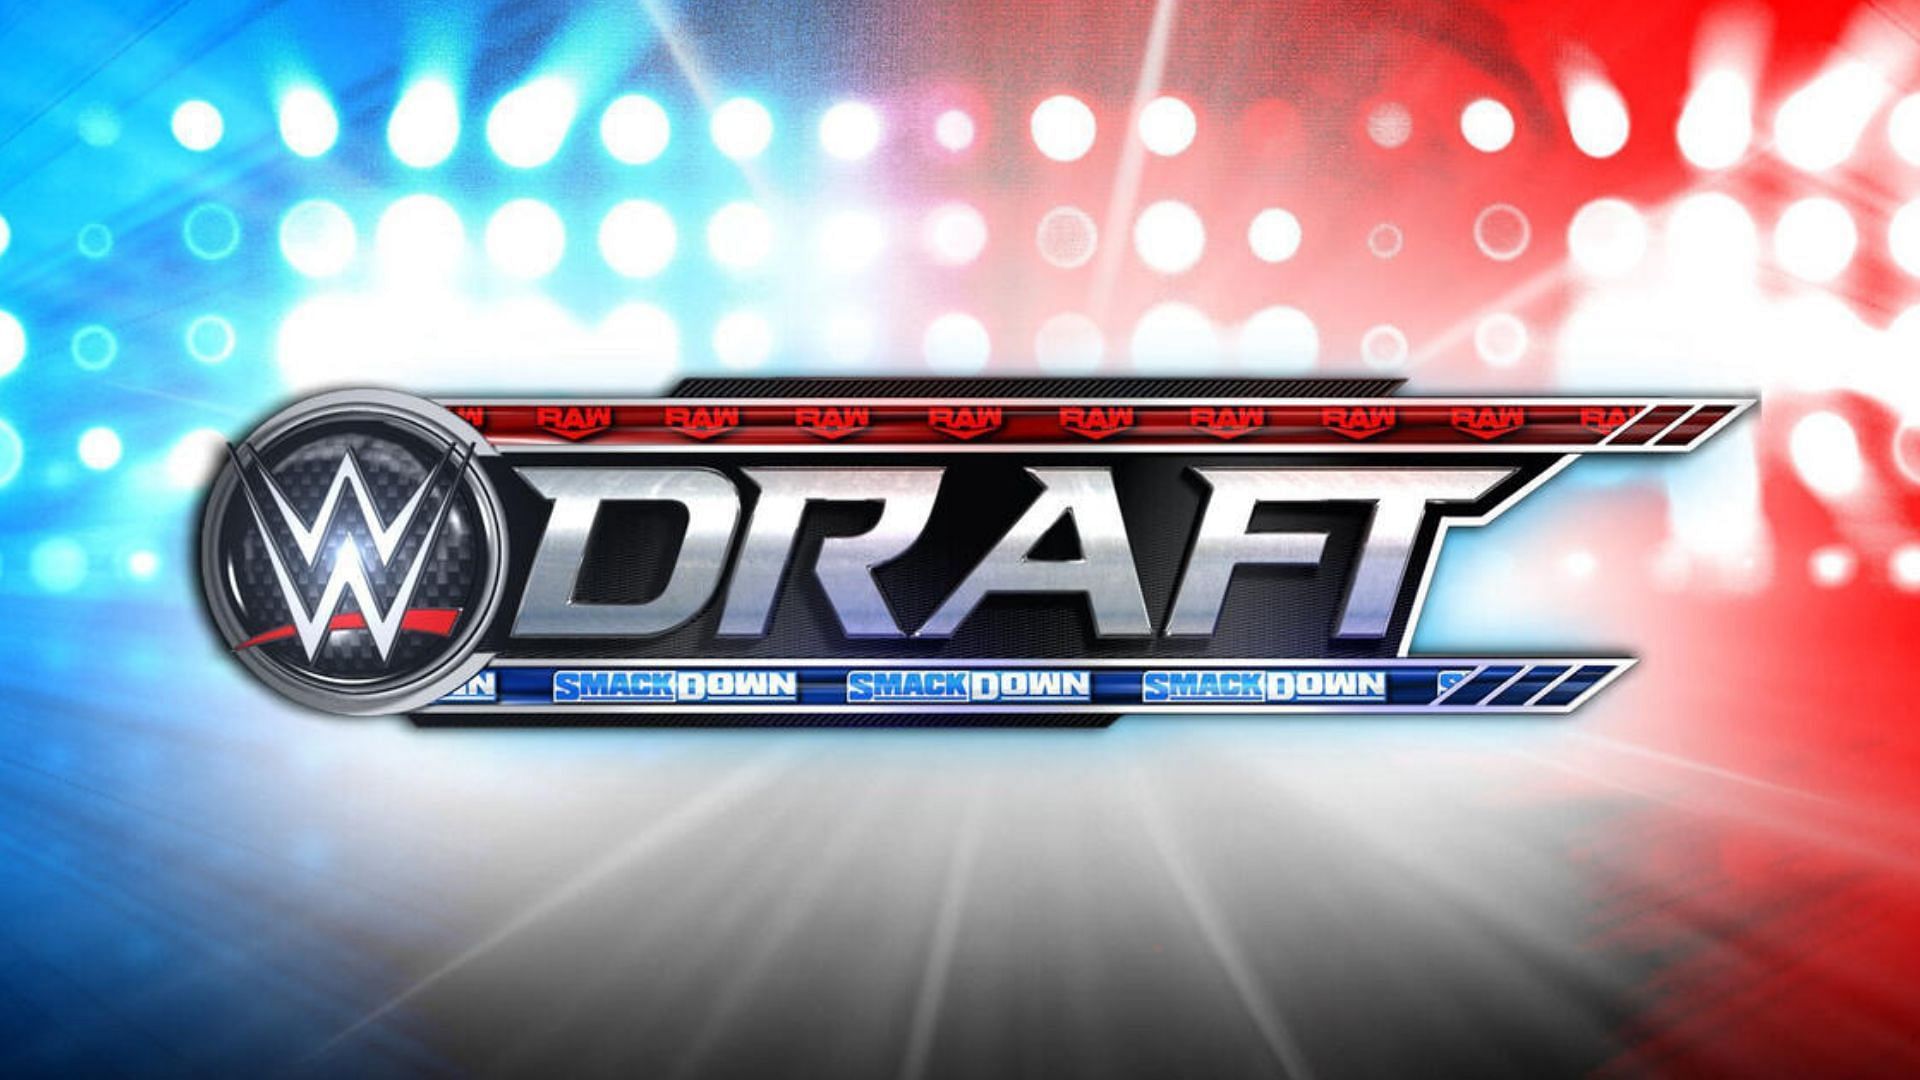 The draft will be taking place soon.